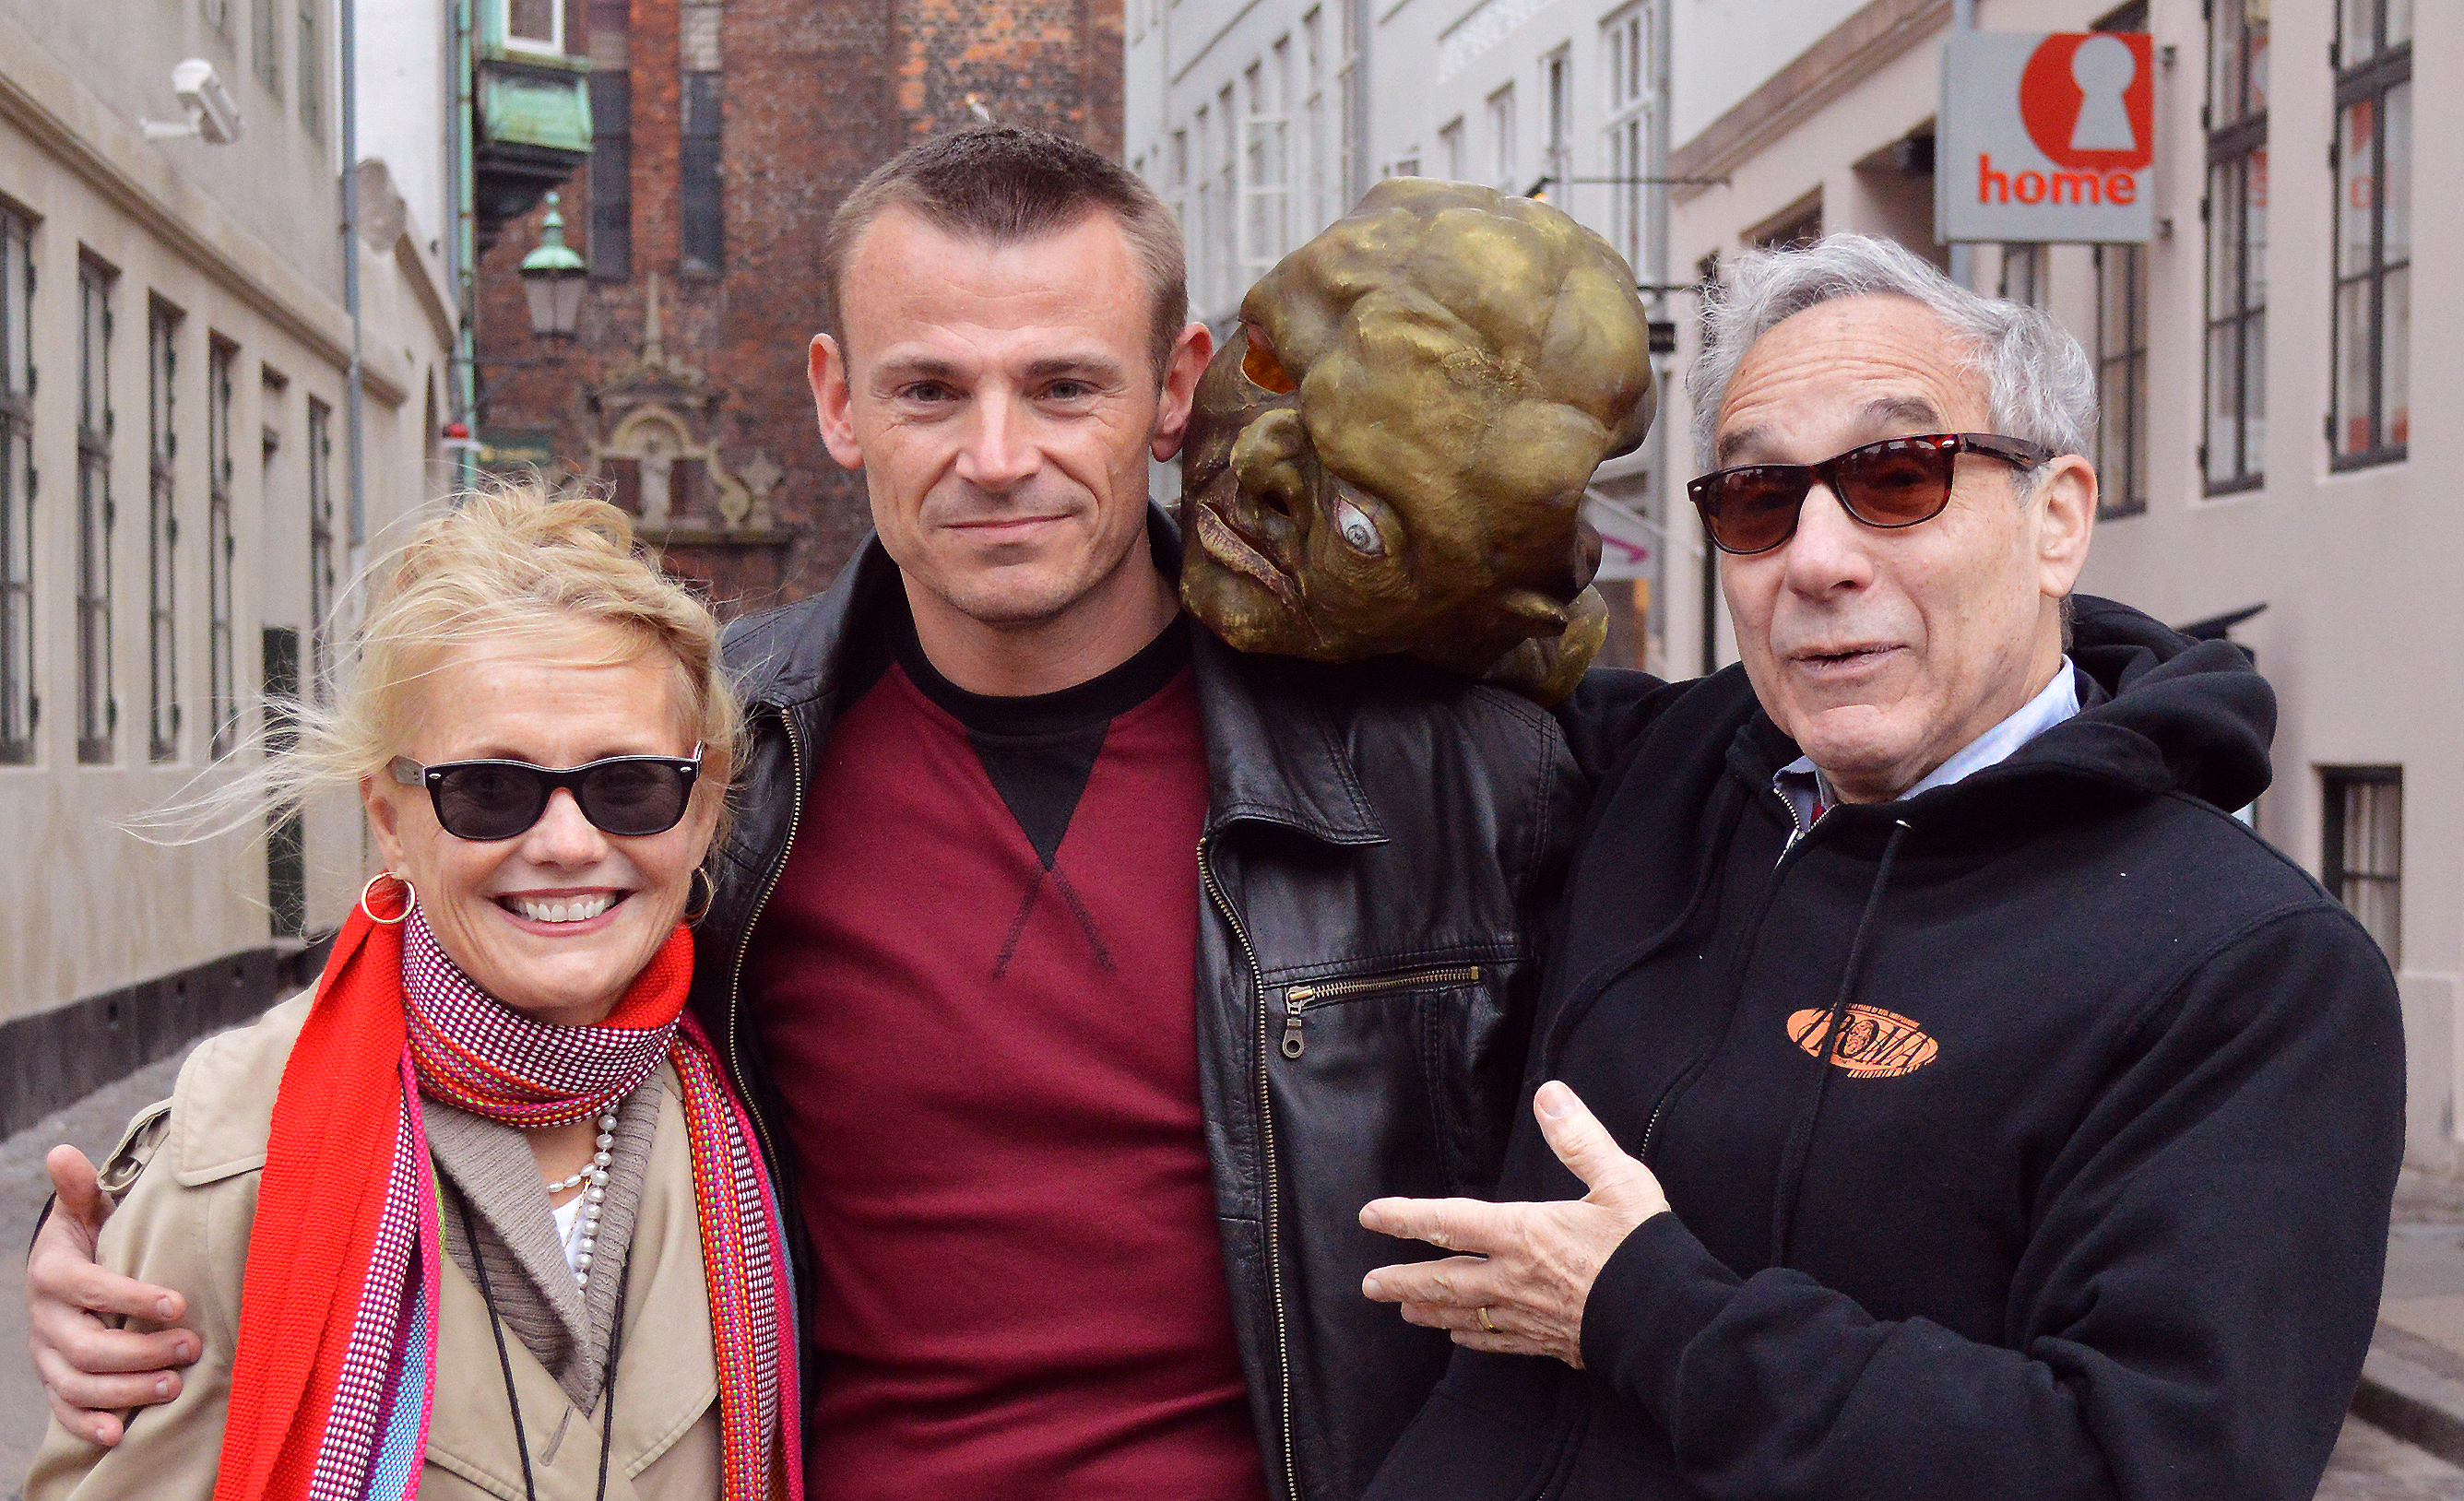 Kim Sønderholm seing the sights in Copenhagen with Pat and Lloyd Kaufman...and Toxie - September 24, 2014